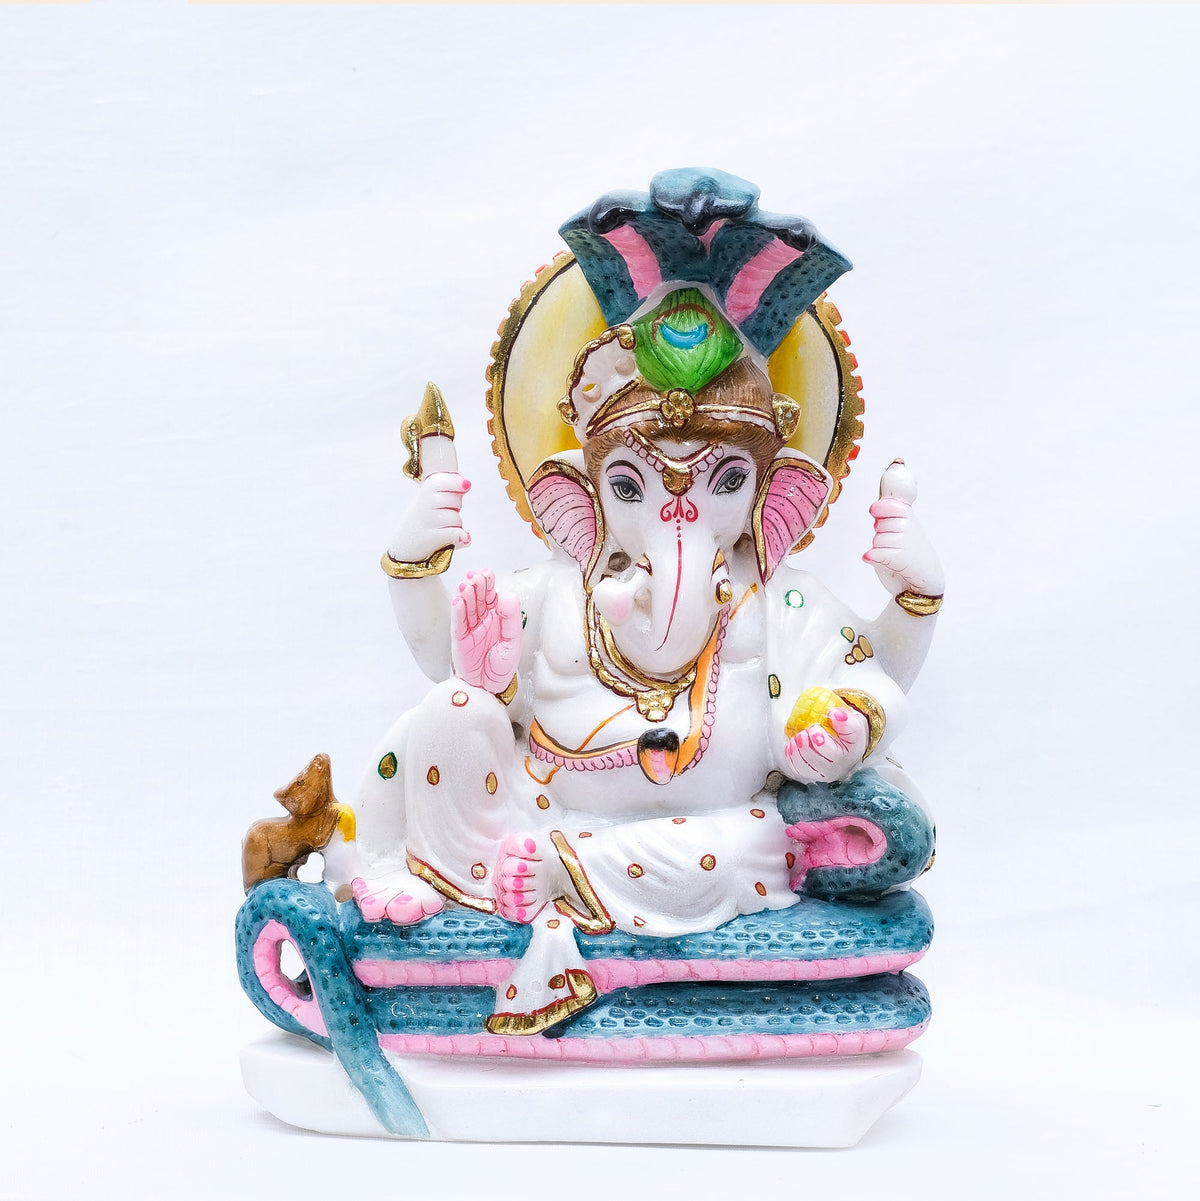 Marble Murti Vighnaharta Ganesh Ji Seated Atop Three-Mouthed Green Serpent - 12 x 9 x 4 inches